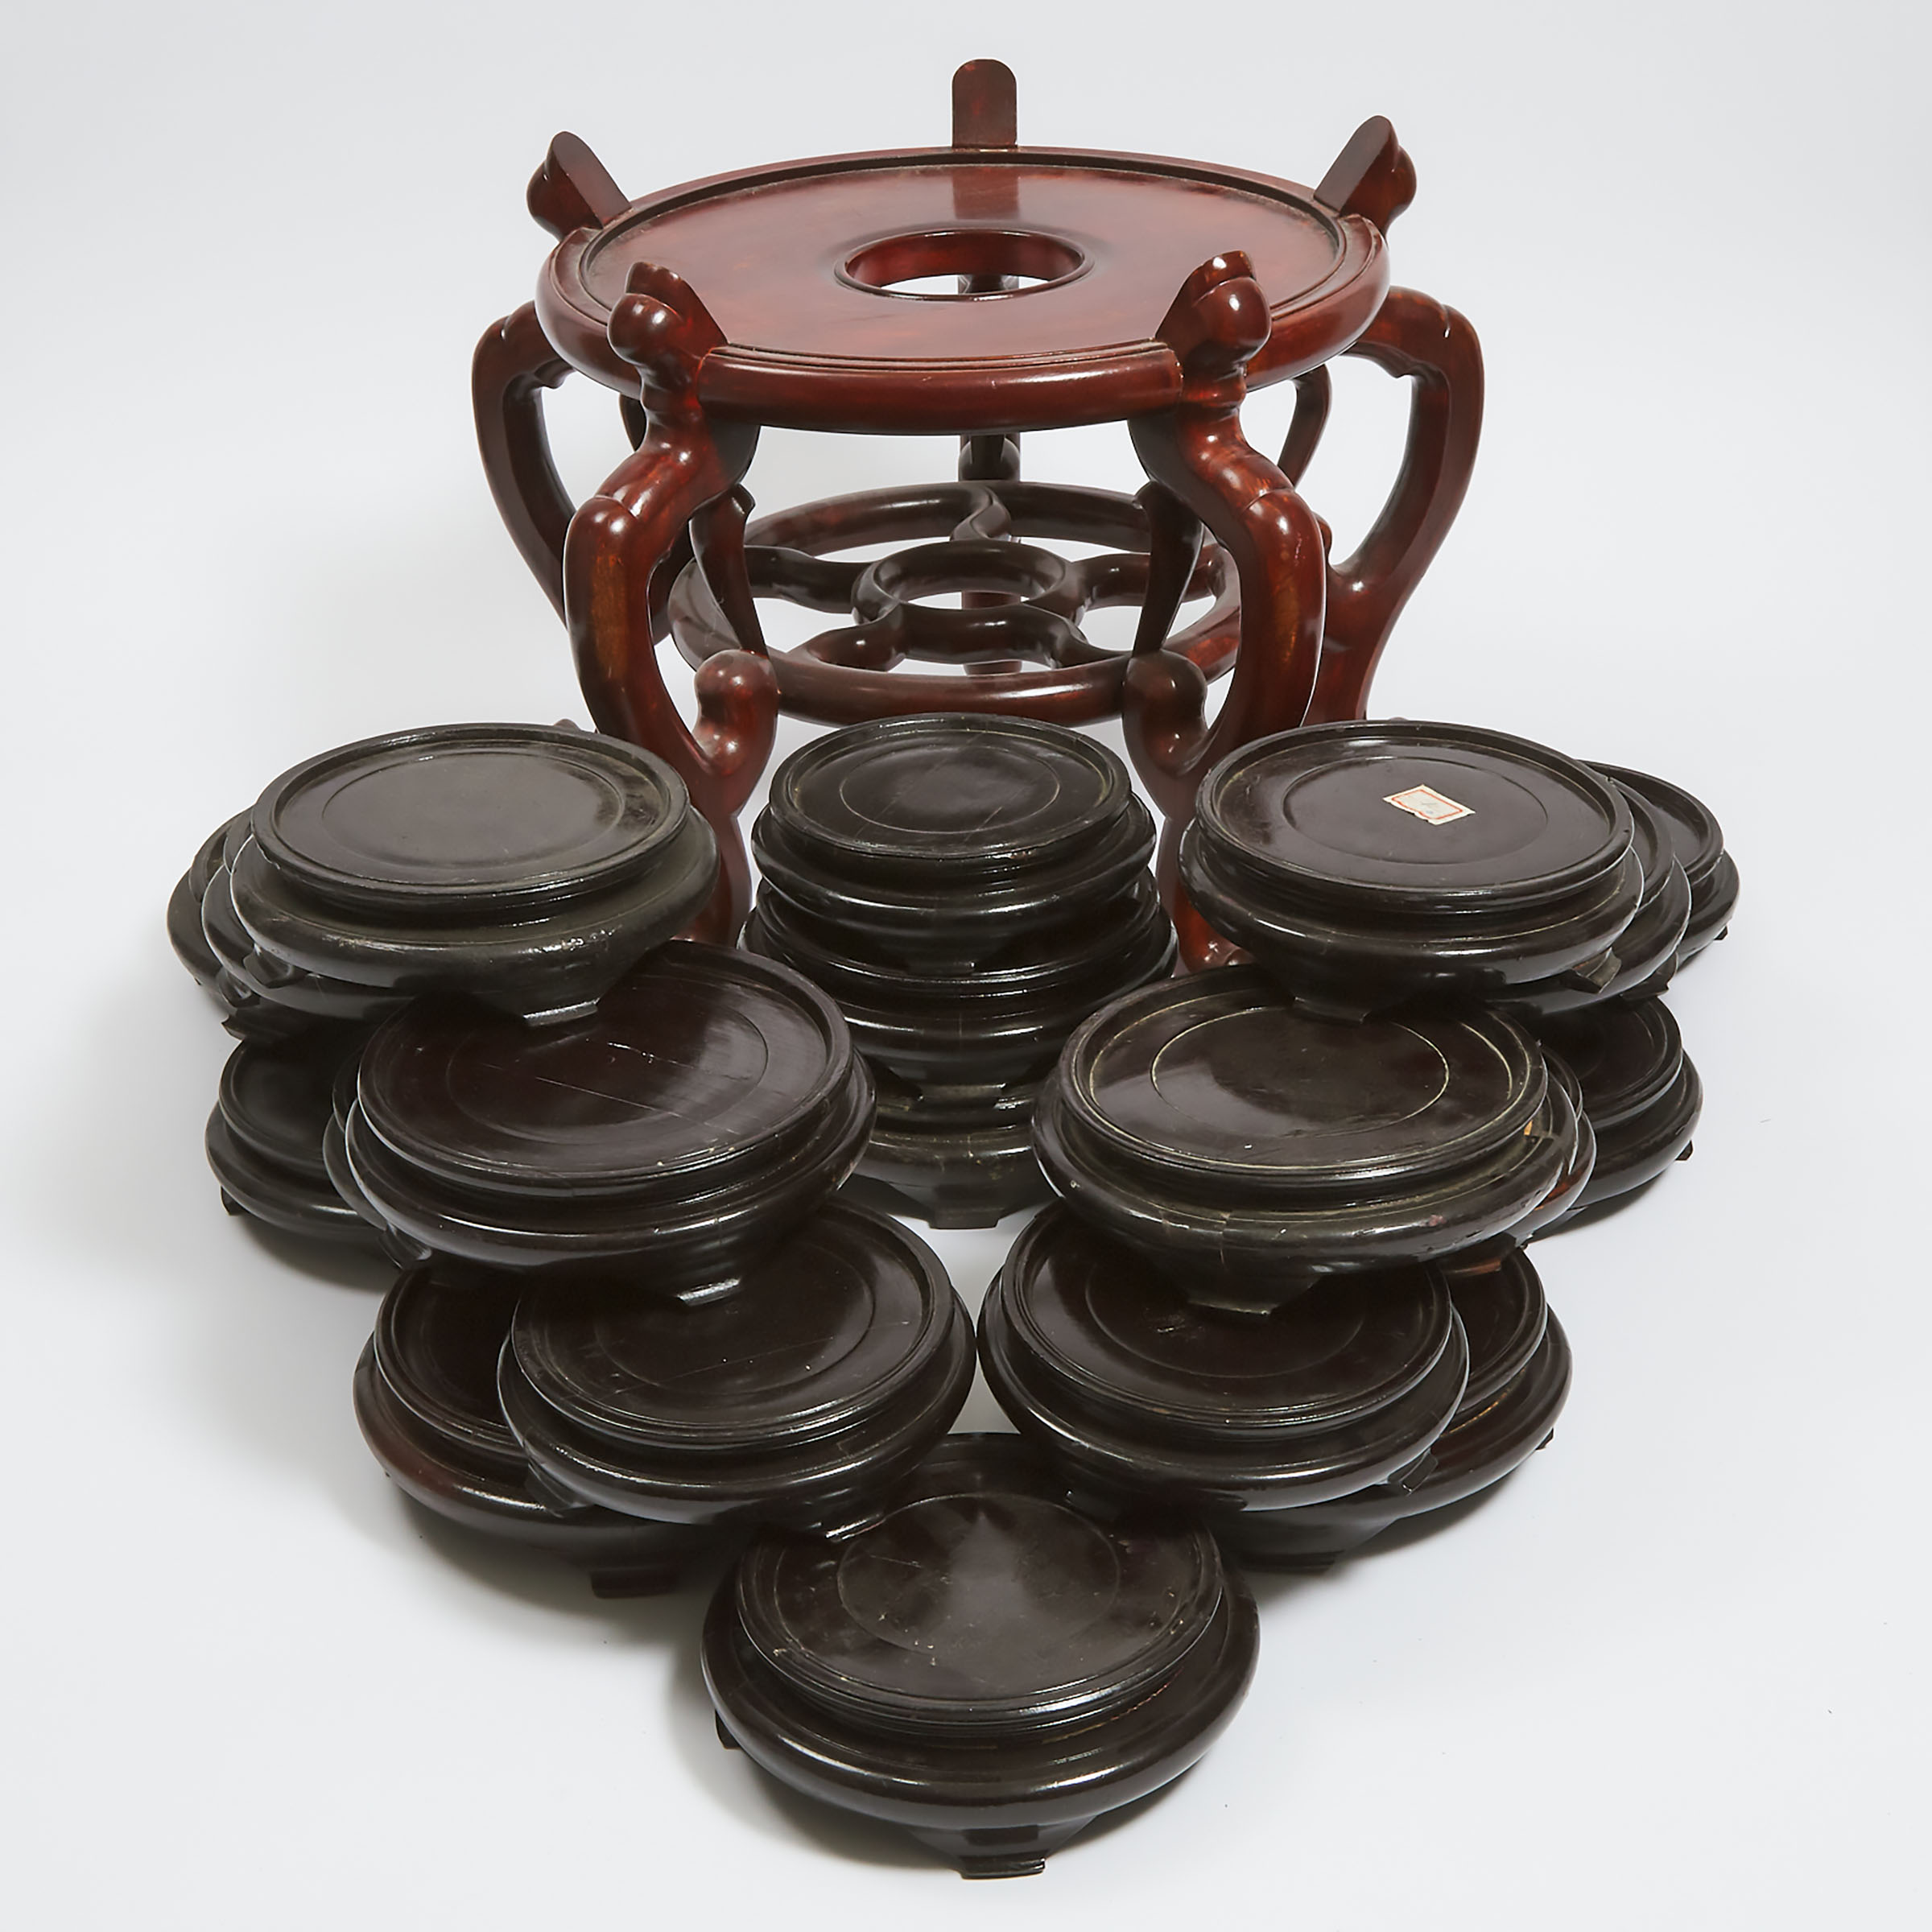 A Group of Twenty-Three Large Chinese Wood Stands